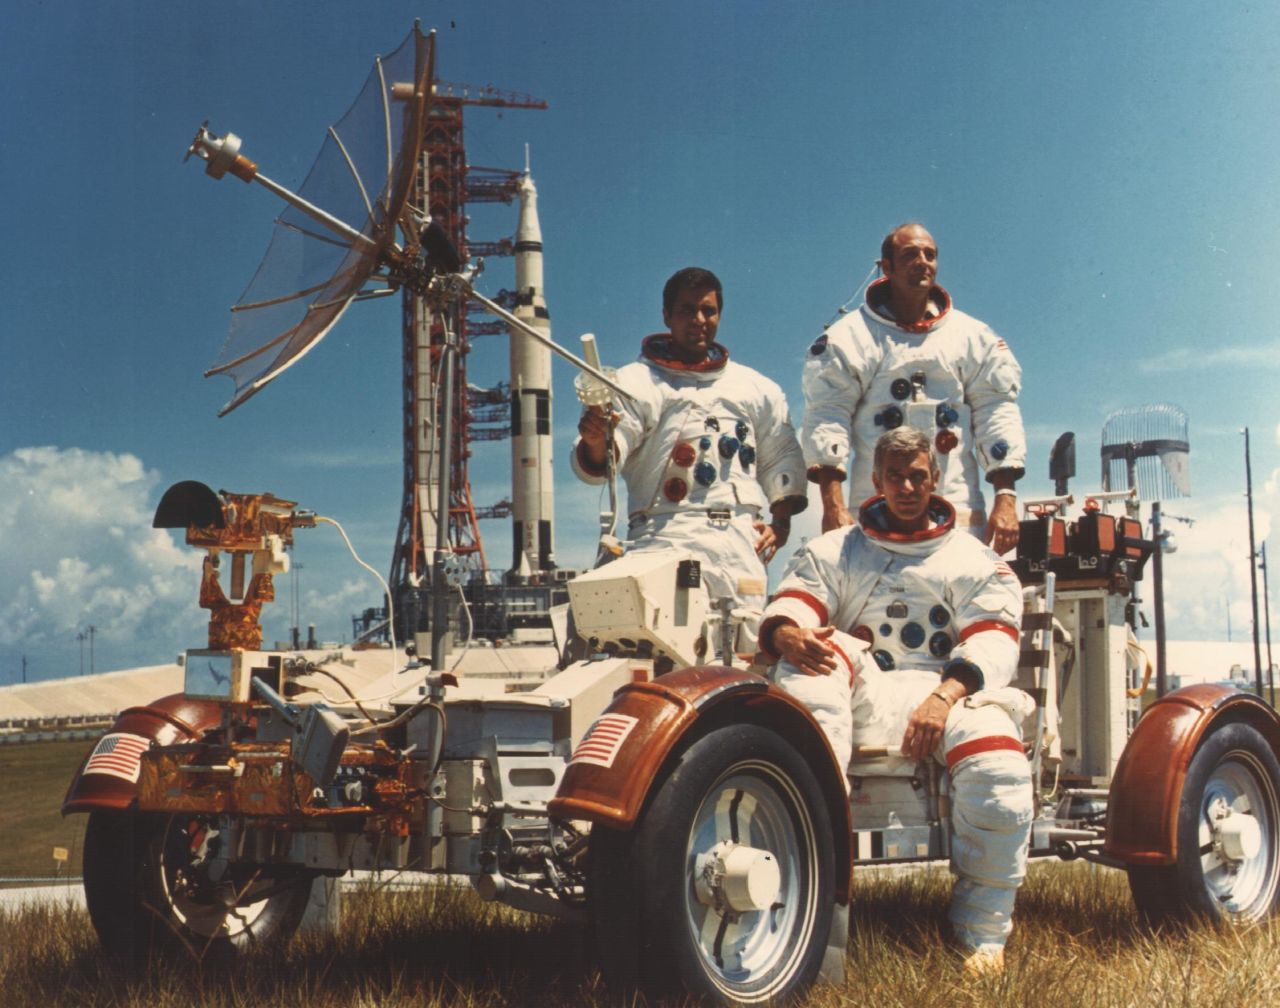 Apollo 17 was NASA's last manned mission to the moon. It launched on December 7, 1972, landed on the moon December 11 and splashed down on Earth on December 19. From left are Harrison Schmitt, Gene Cernan and Ronald Evans. Schmitt and Cernan walked on the moon while Evans orbited in the command module. The crew stayed on the surface 75 hours and collected 243 pounds of lunar material. 